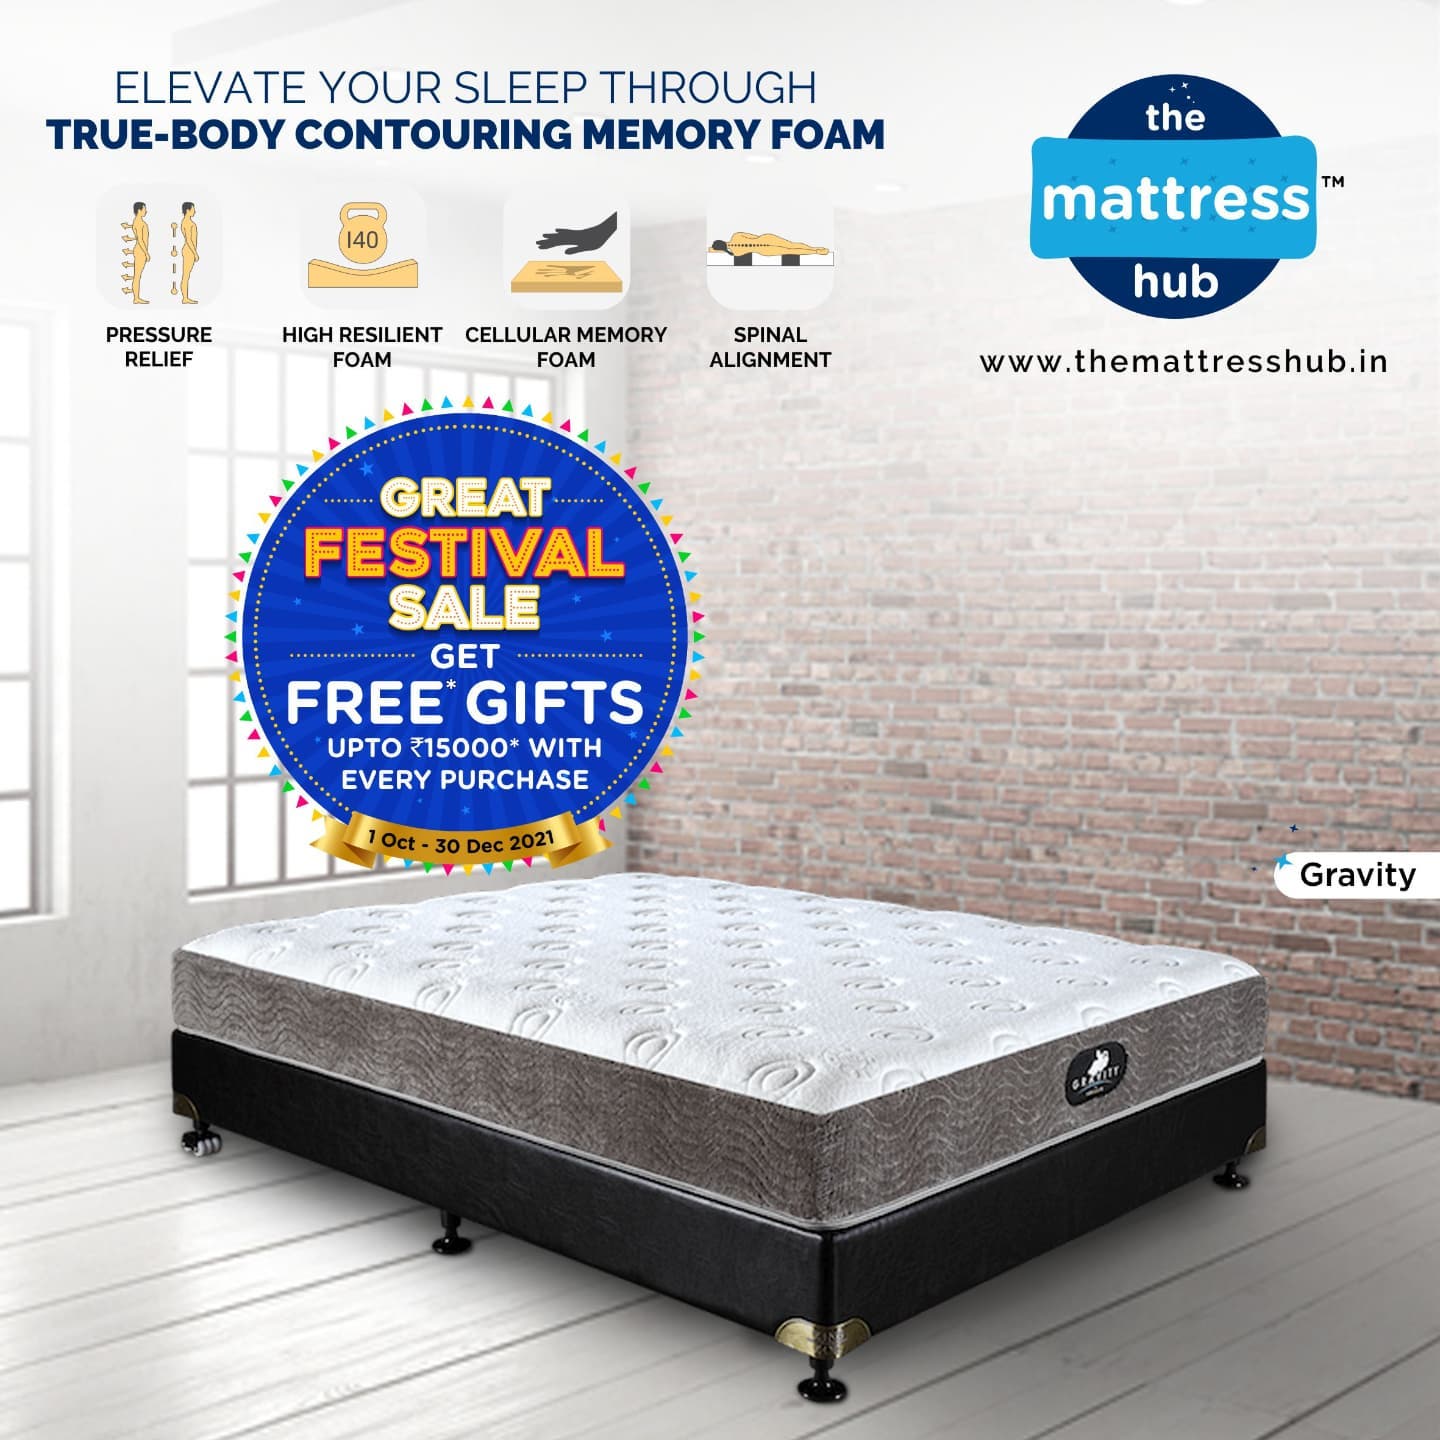 The Mattress Hub on Twitter: "Gravity is a perfect blend of body contouring high density Ortho Memory on top of good supportive High Resilient Foam the core to support the